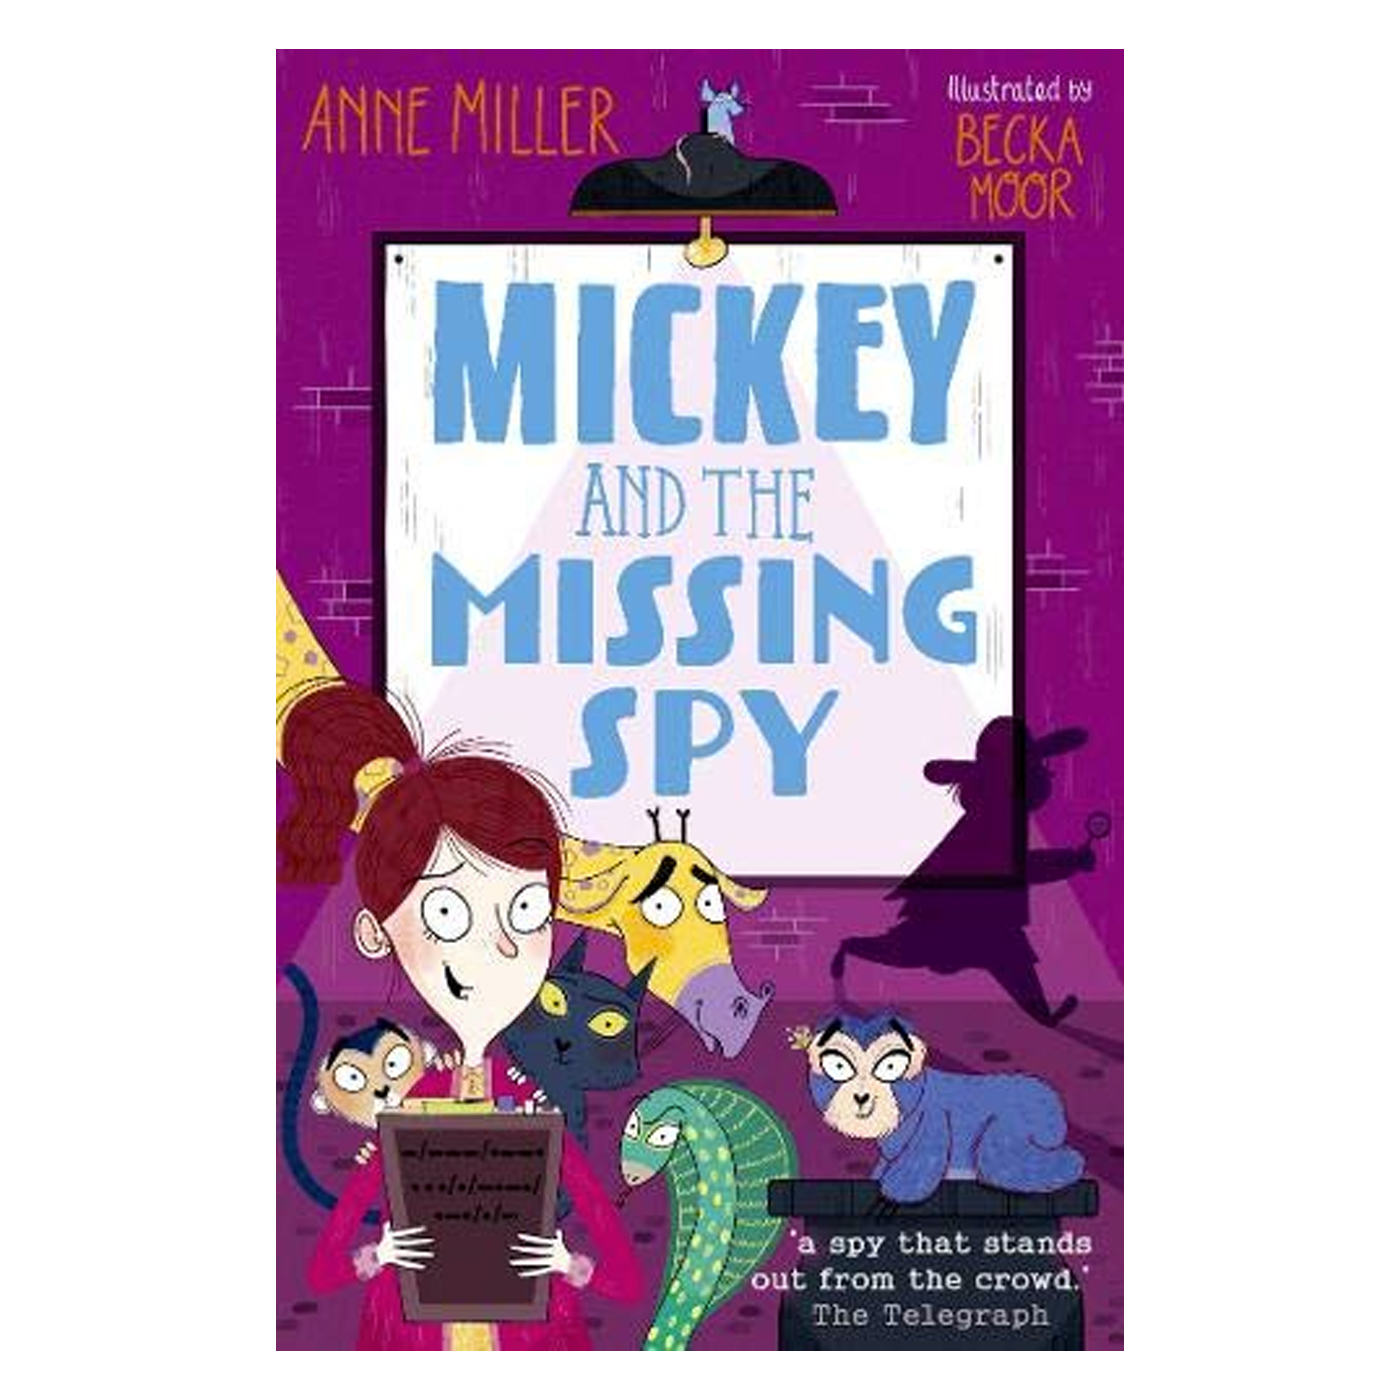  Mickey And The Missing Spy